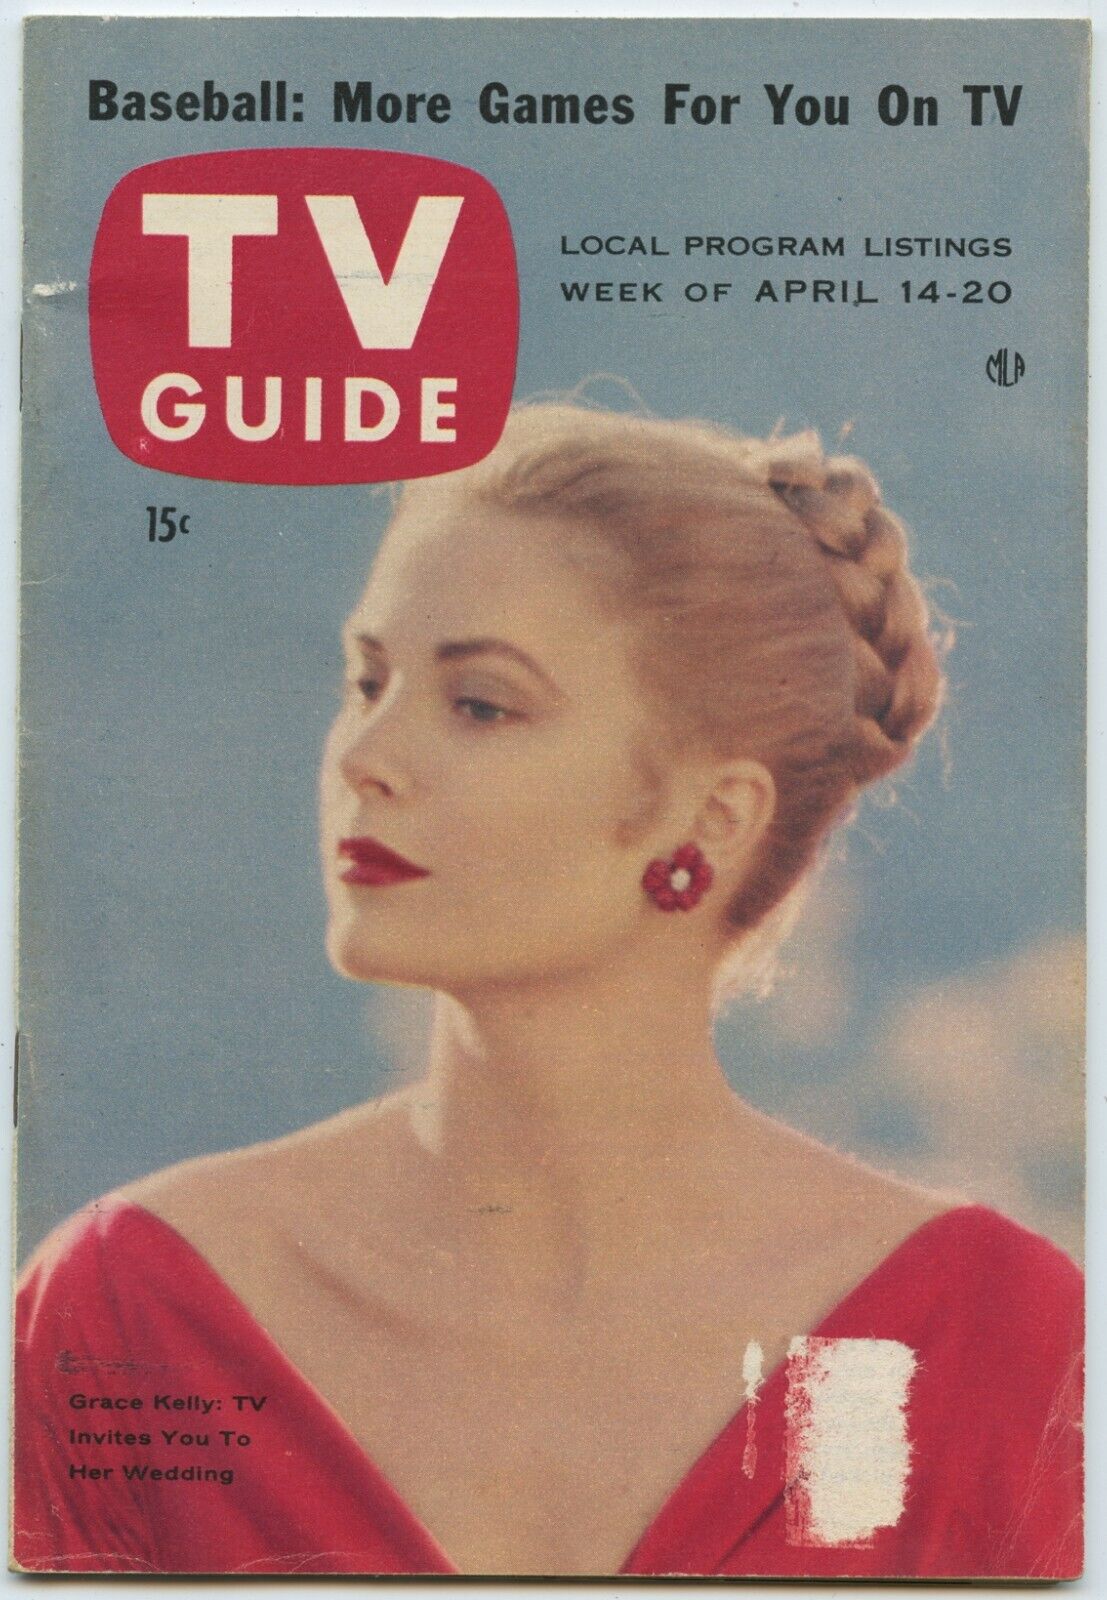 TV GUIDE April 1956 (Princess) GRACE KELLY: TV Invites You To Her Wedding